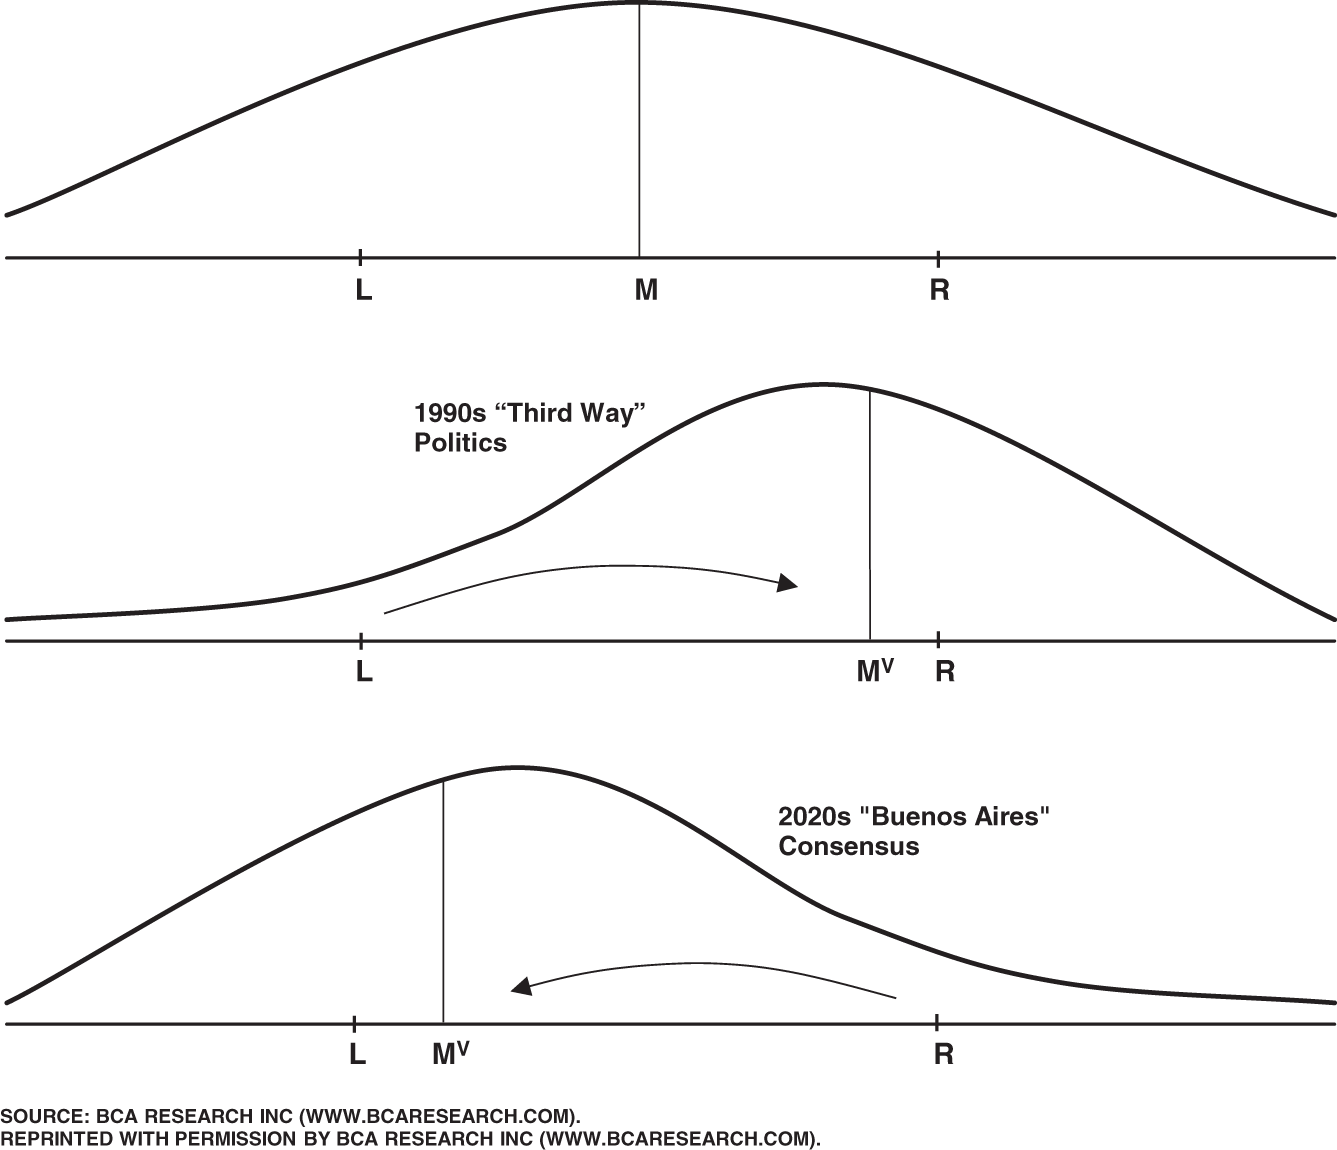 Illustration of the median voter theorem in action. The first panel depicts the precept of the MVT; the second panel shows enabled supply-side policies in the 1990s; the third adopts a more economic outlook.